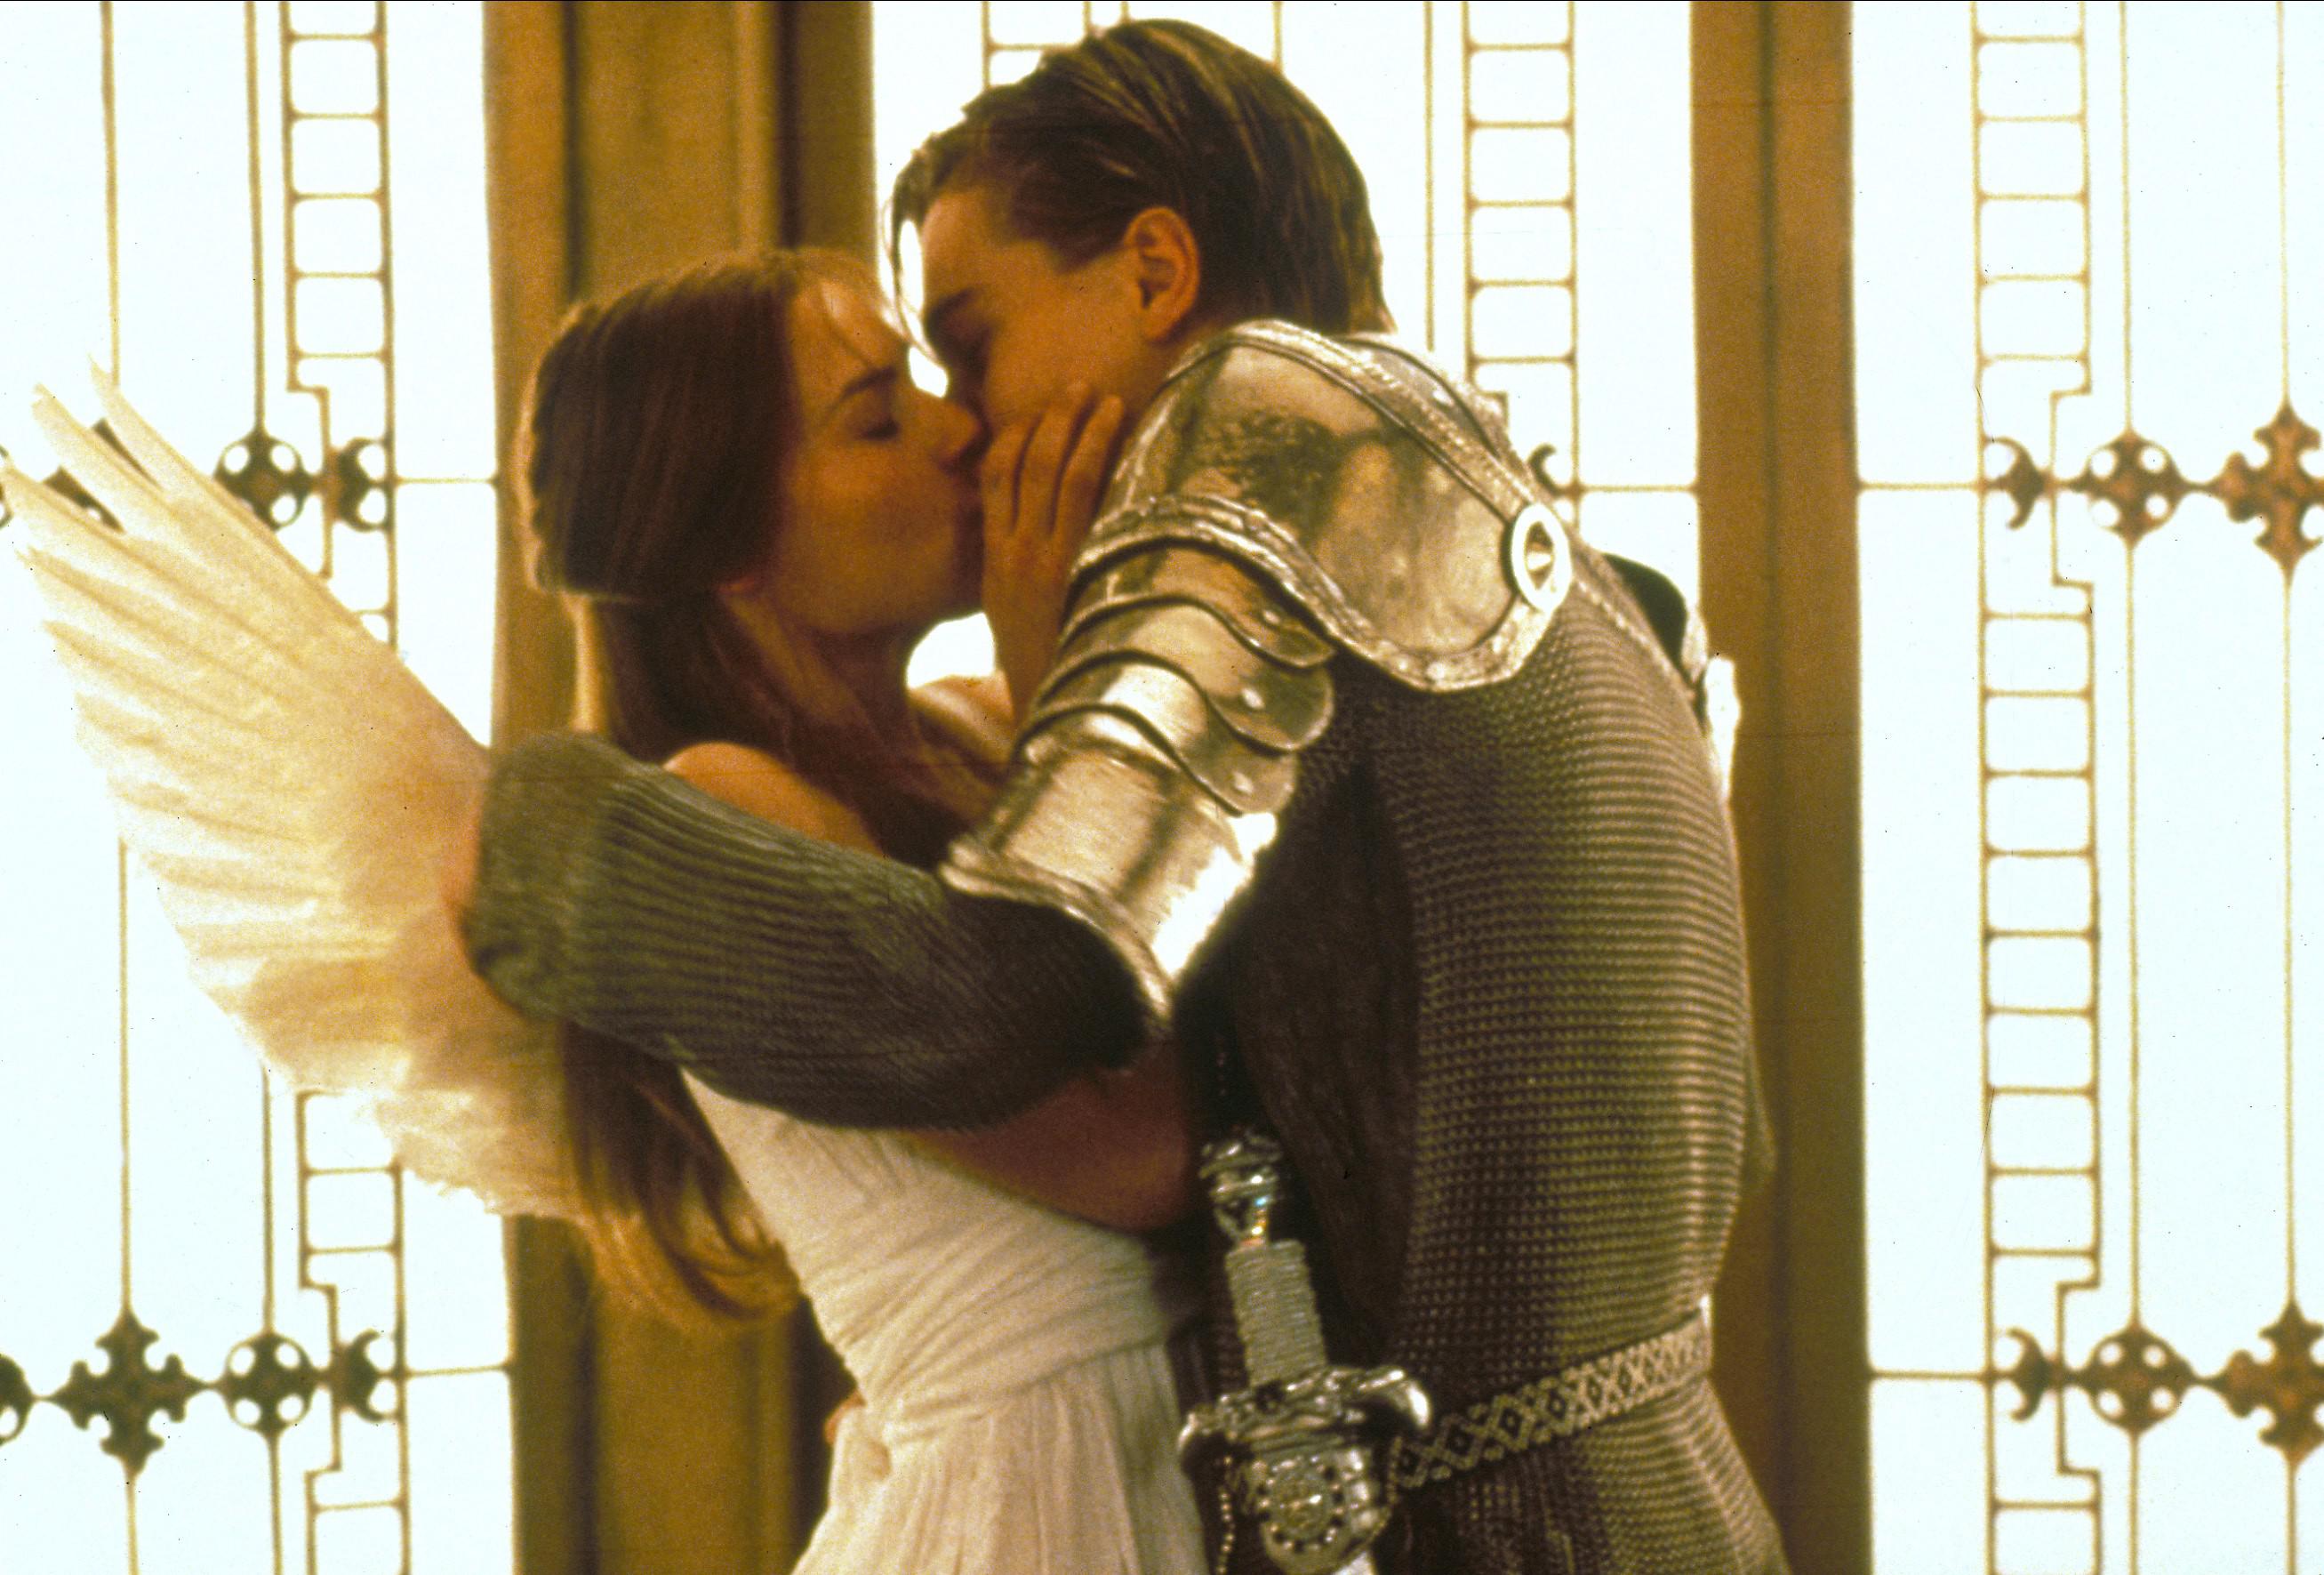 Claire Danes as Juliet and Leonardo DiCaprio as Romeo kiss in Romeo + Juliet